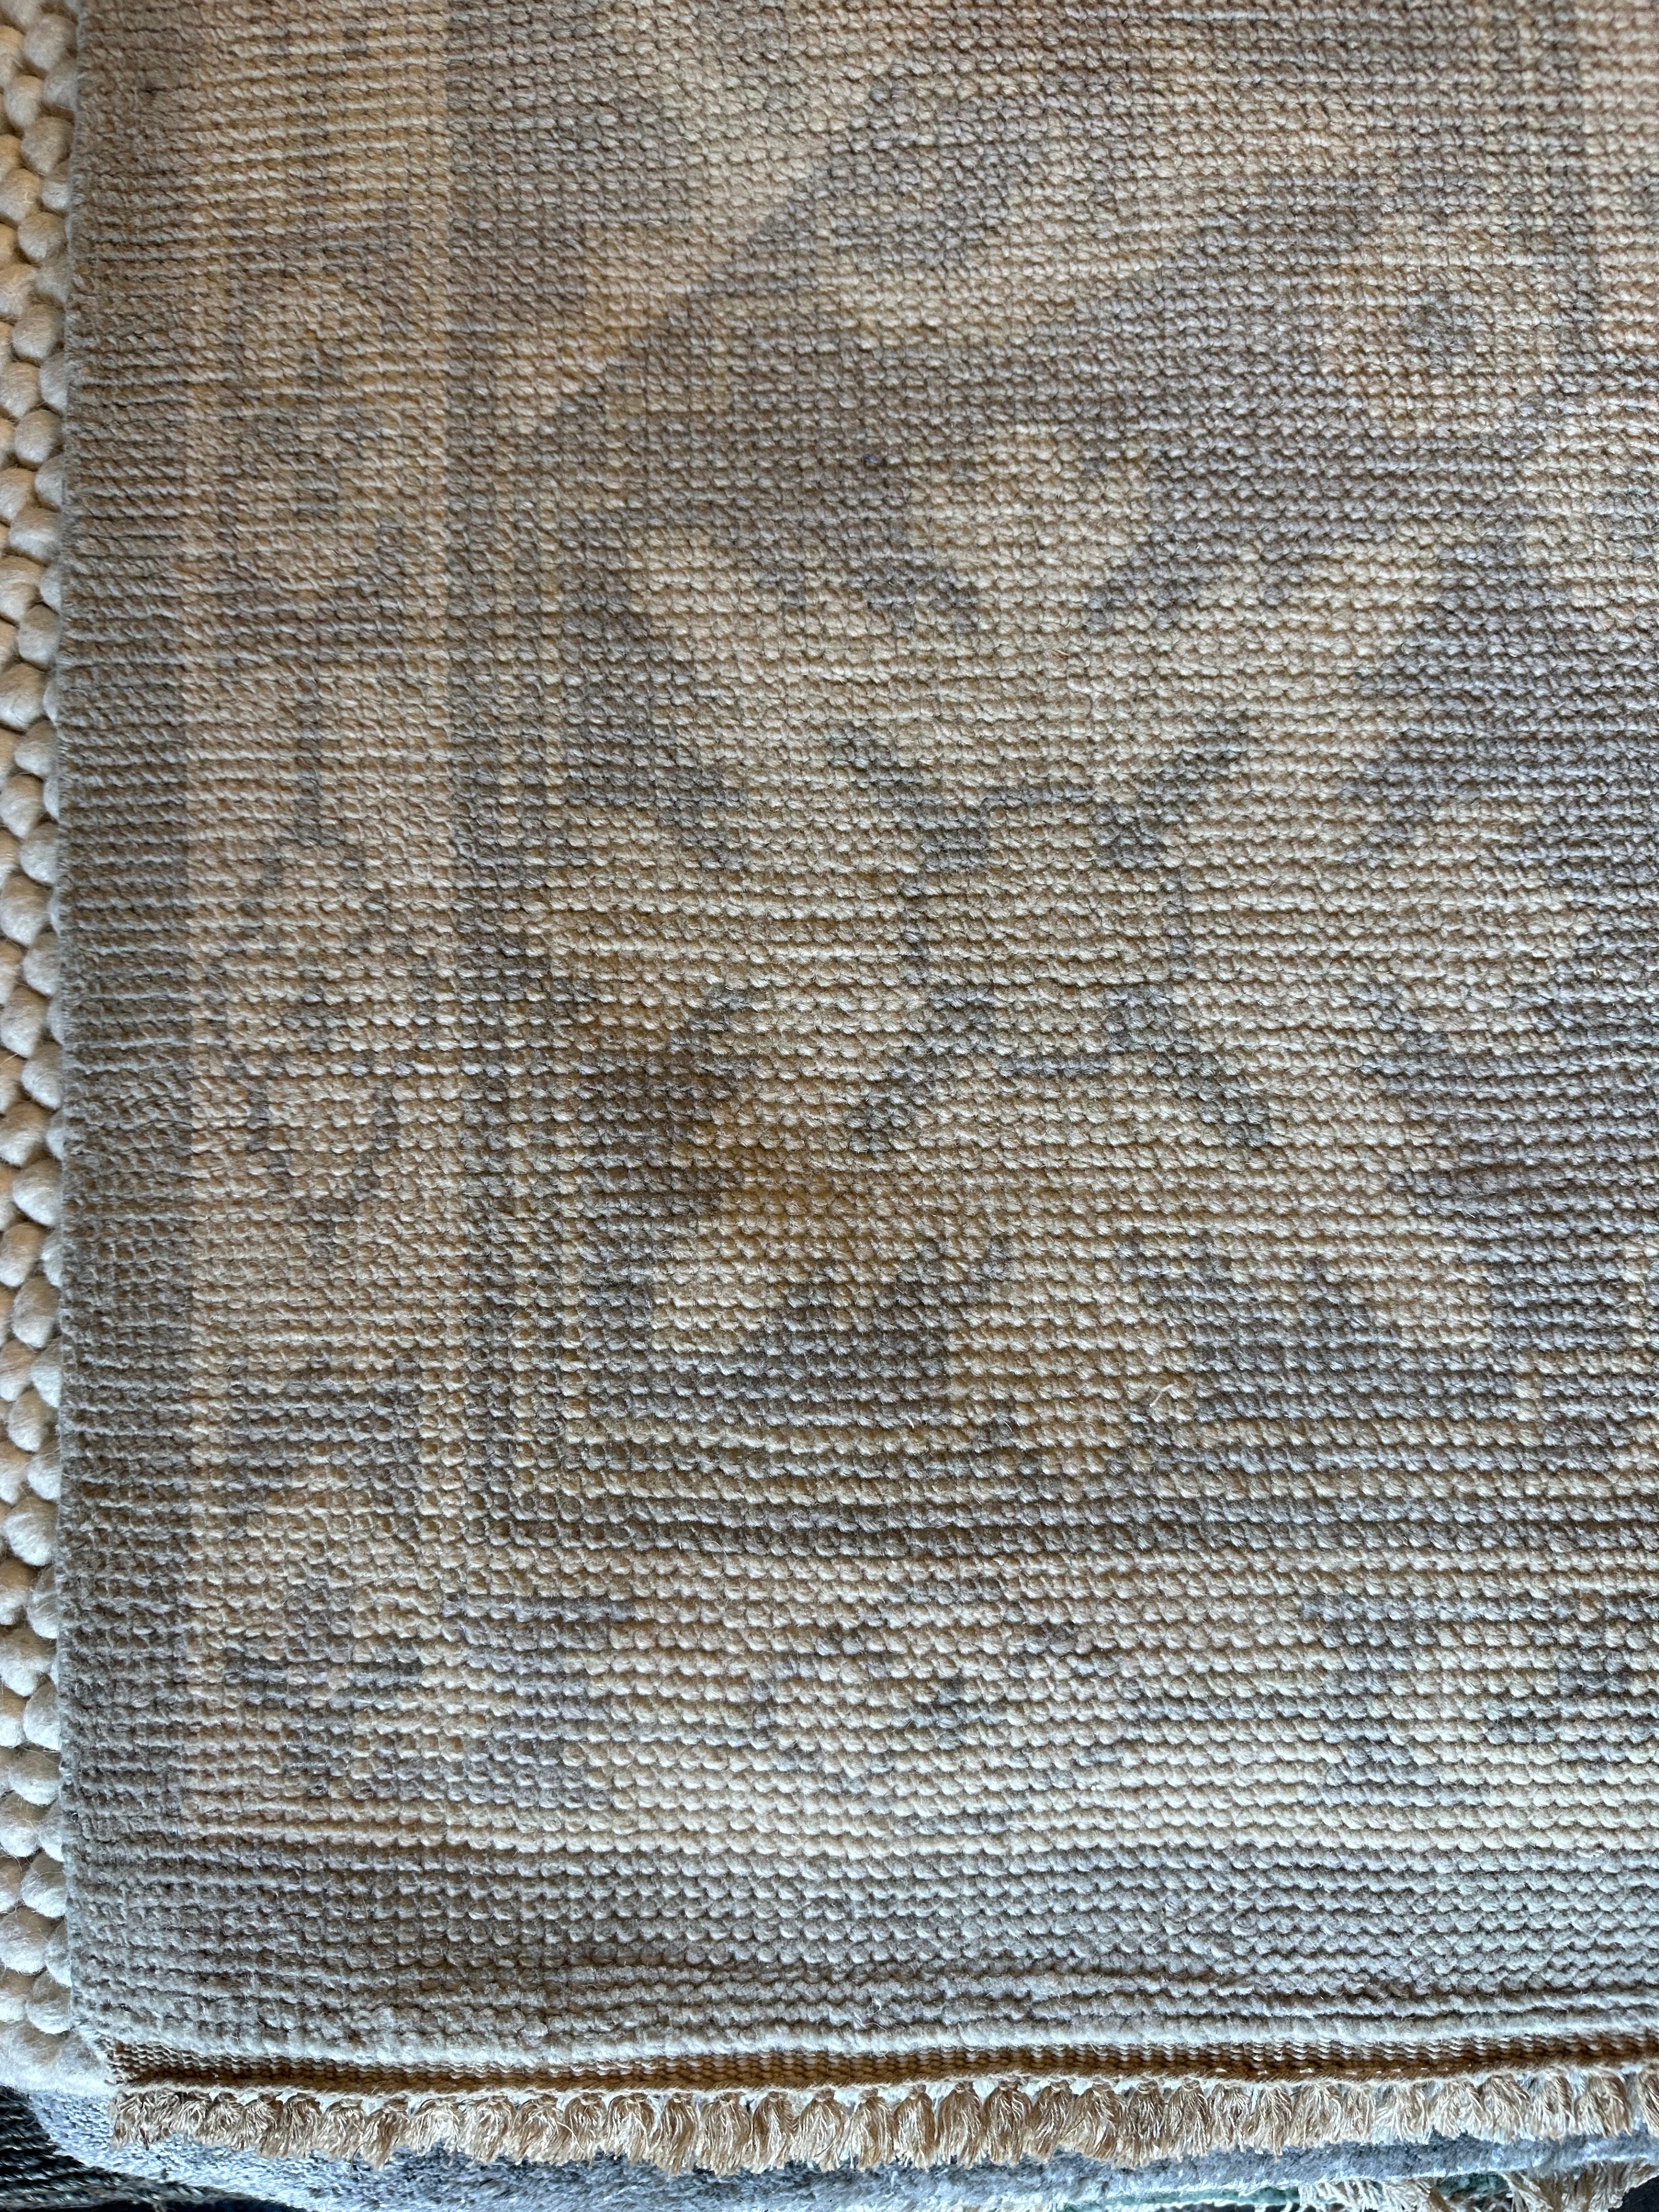 Marina Schiano 9.9x13.9 Silver and Grey Hand-Knotted Oushak Rug